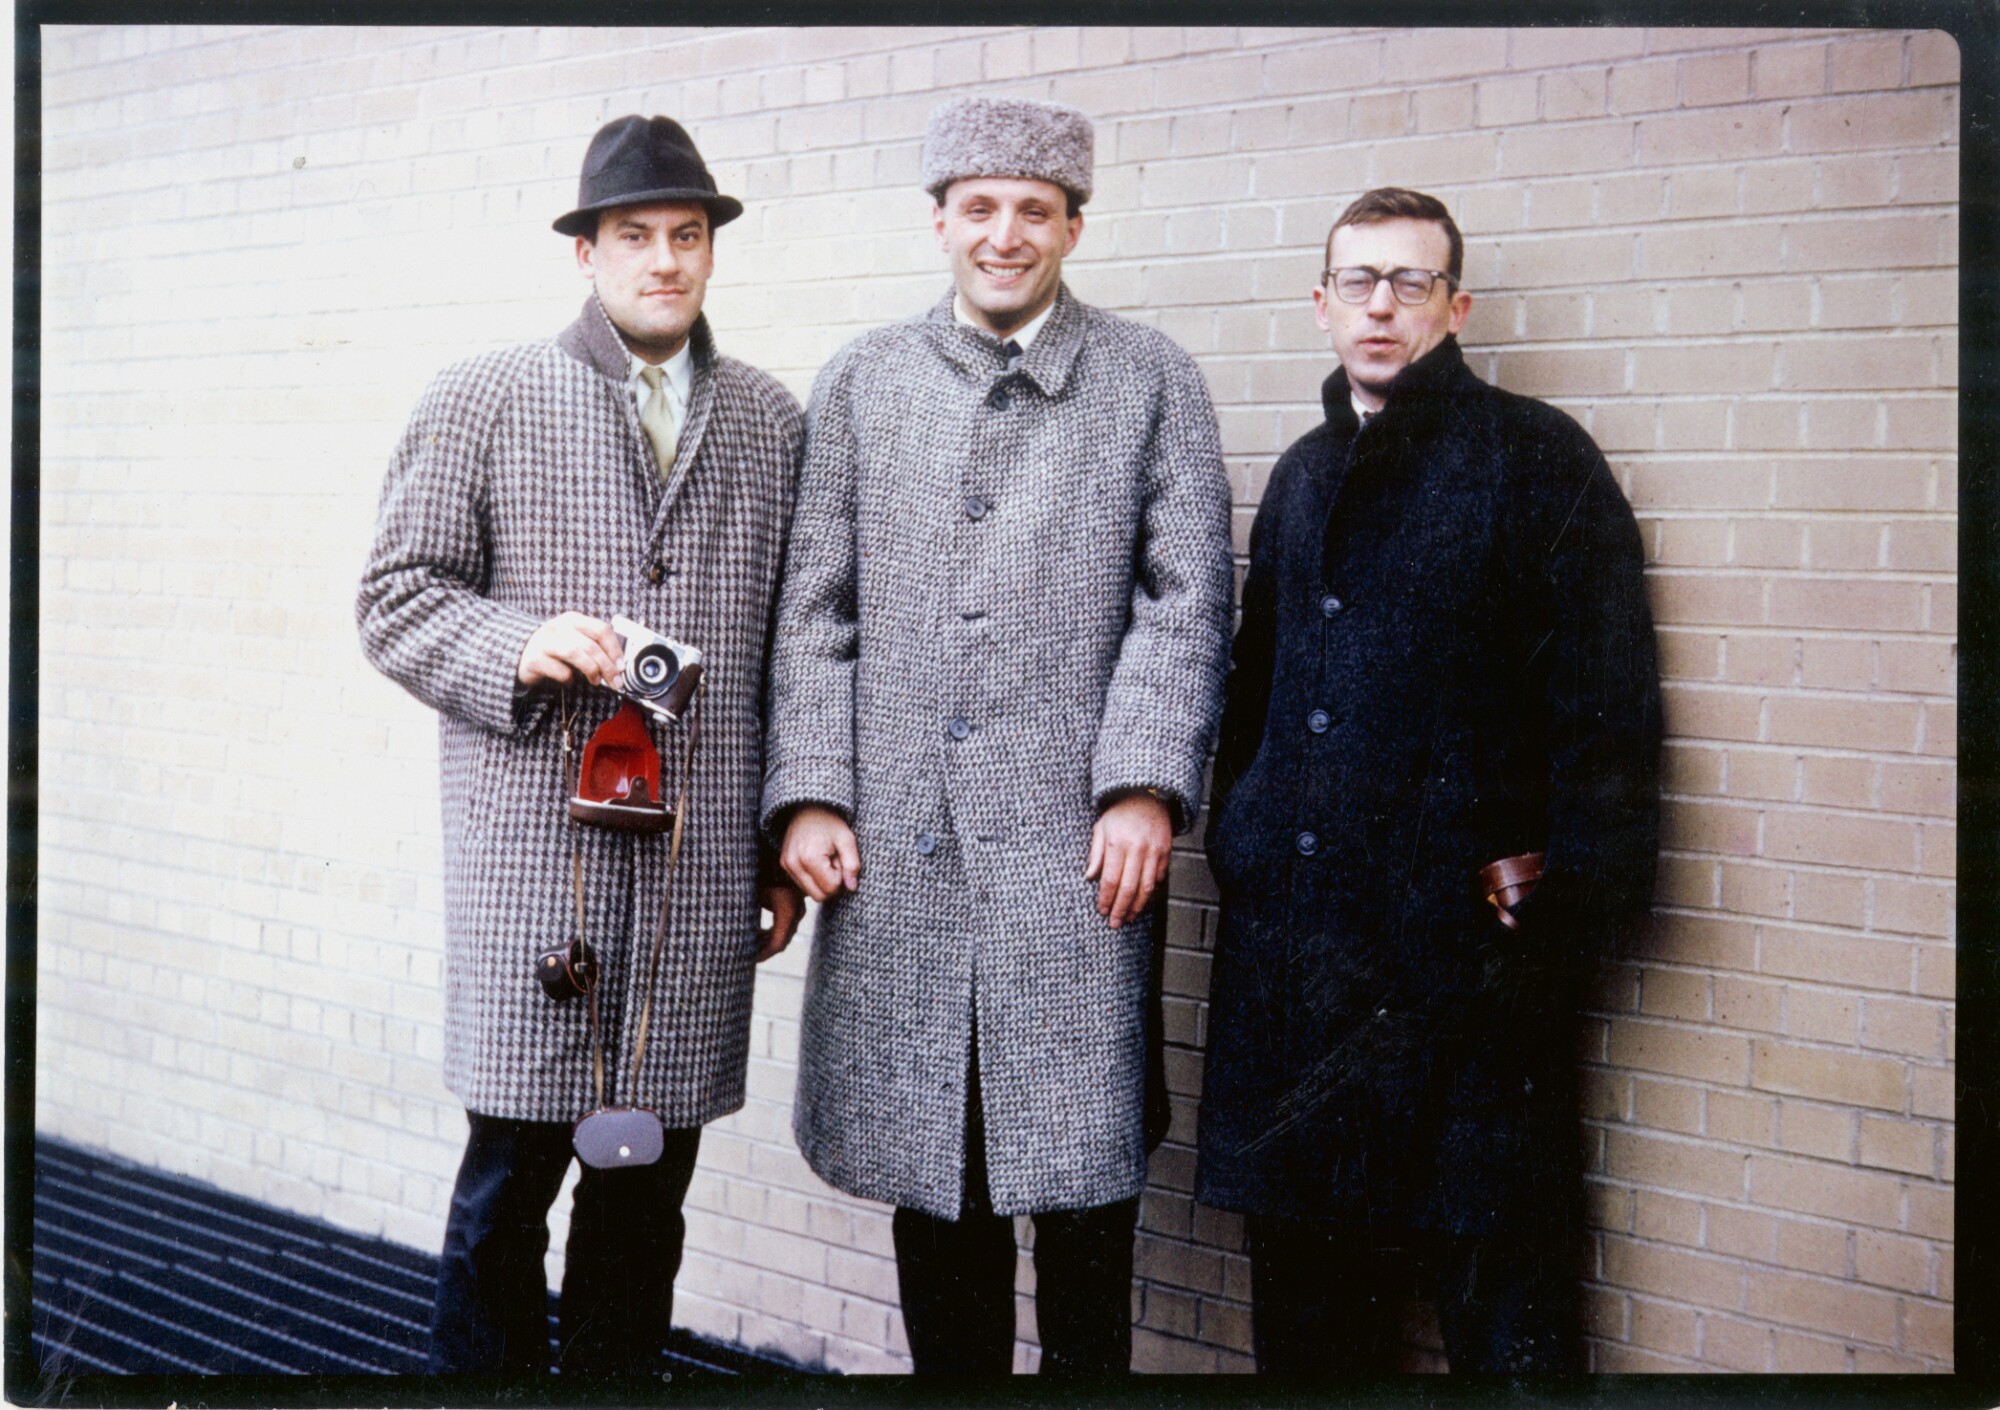 Norman Foster, Richard Rogers and Carl Abbott, bundled up in wool coats stand against a brick wall.